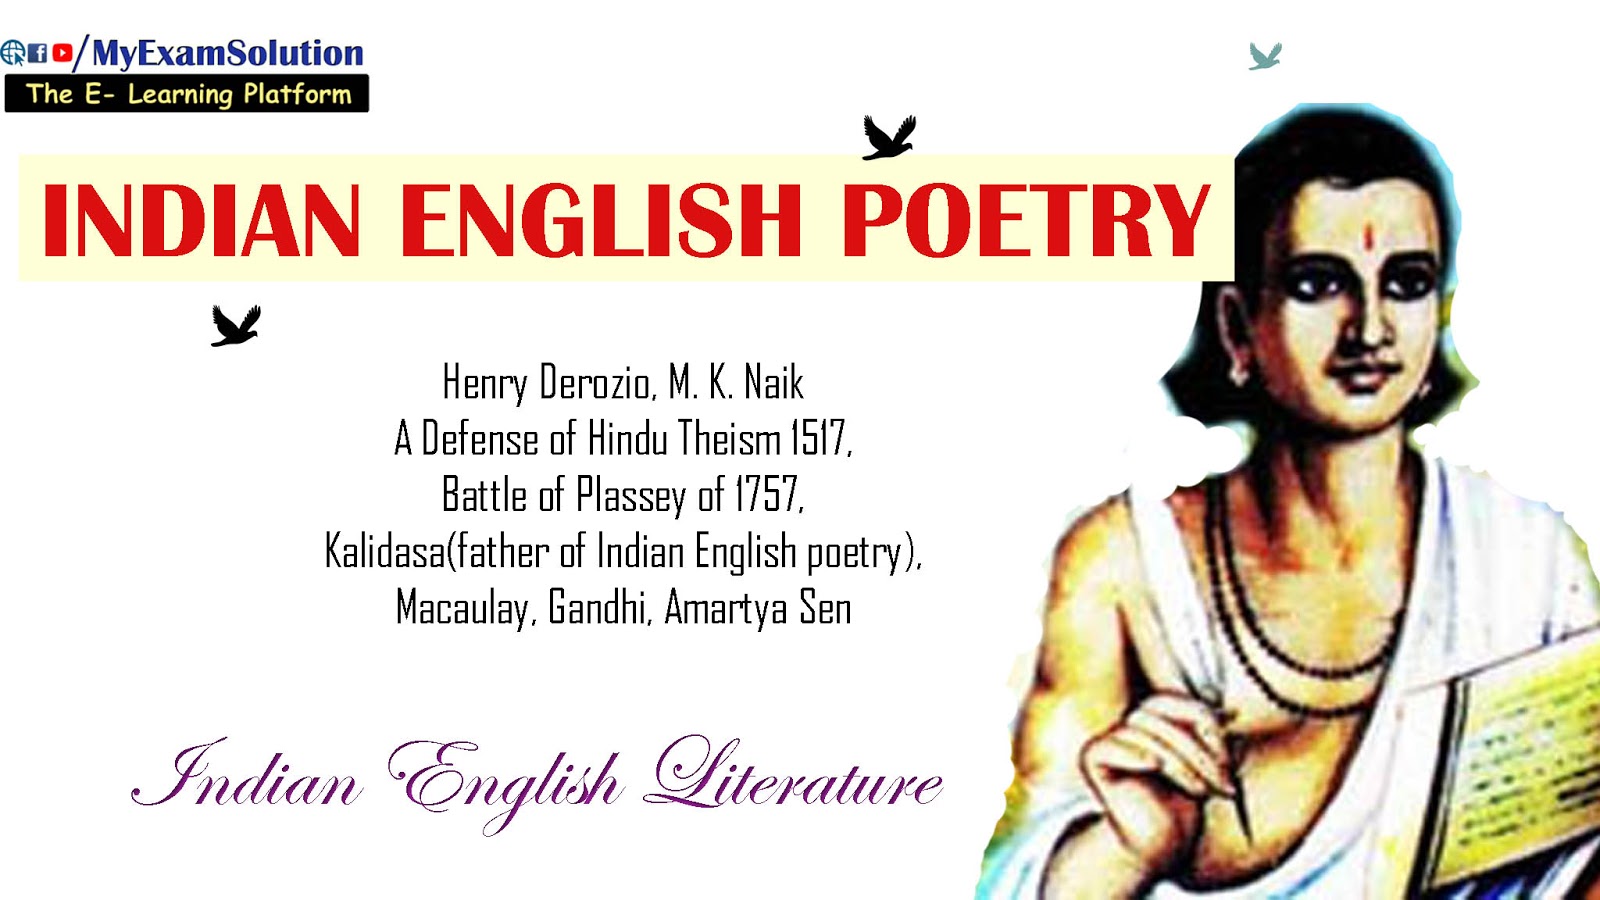 Indian English Poetry in English Literature - My Exam Solution